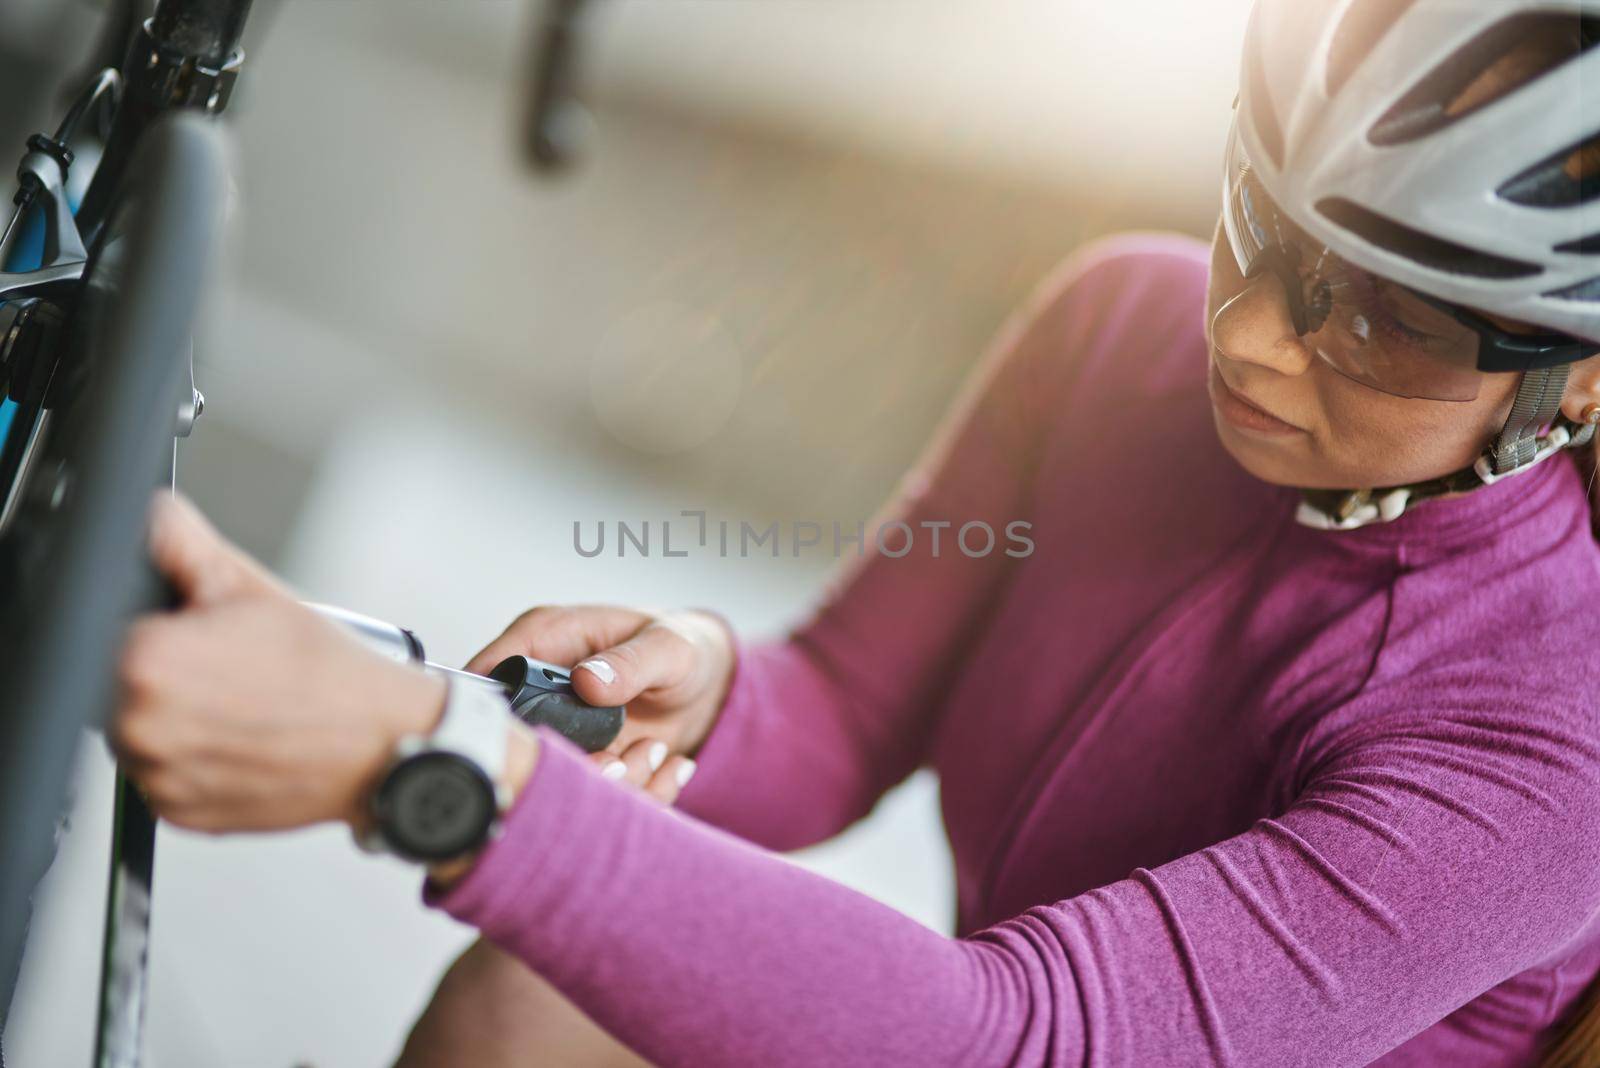 Professional female cyclist wearing protective helmet and glasses looking focused, using pump for inflating the tire of her bicycle, kneeling outdoors on a daytime by friendsstock